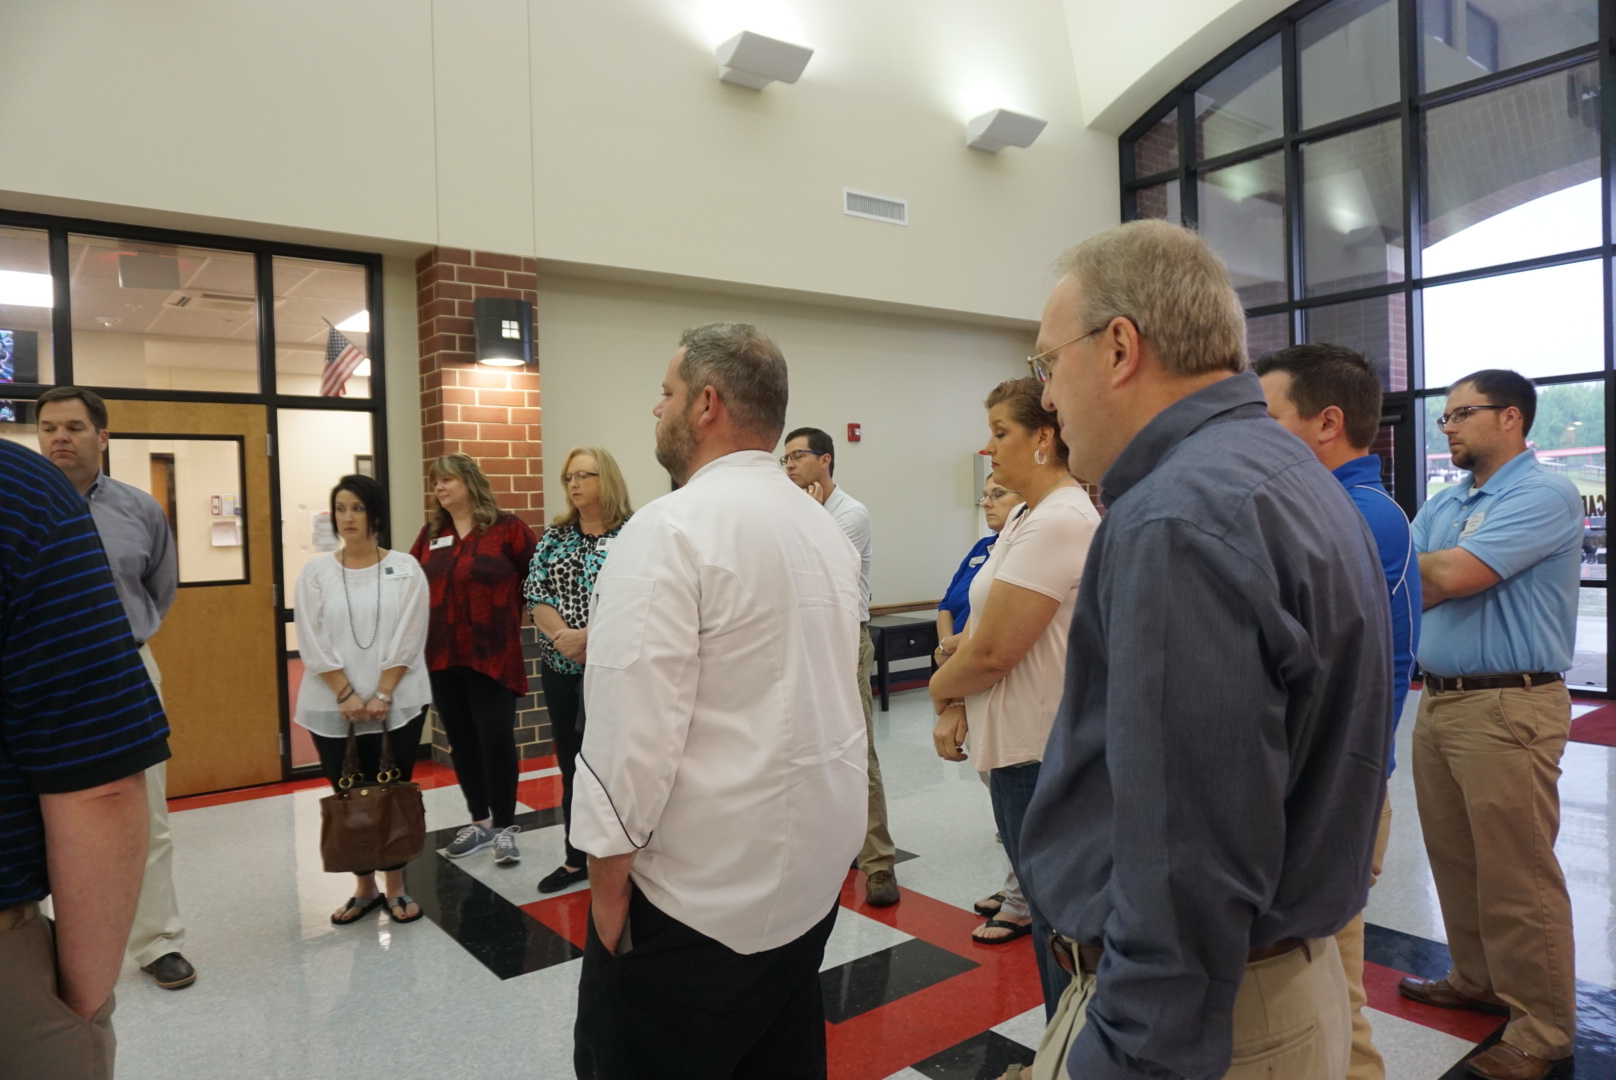 A photo of the architects visiting the facilities.